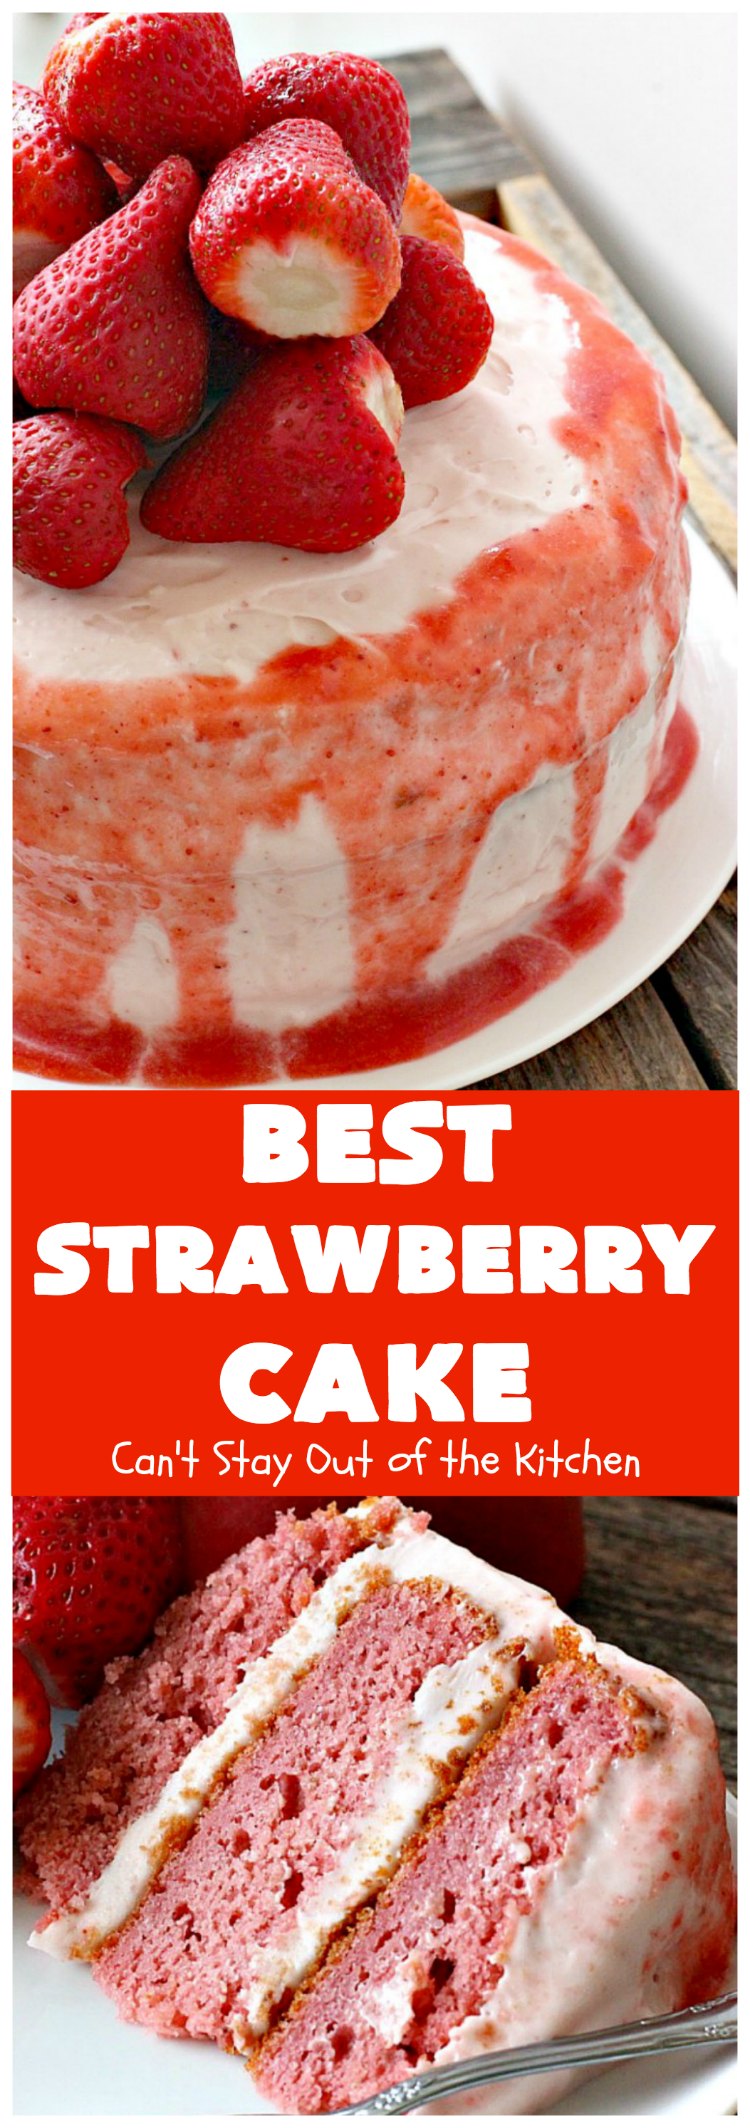 Best Strawberry Cake | Can't Stay Out of the Kitchen